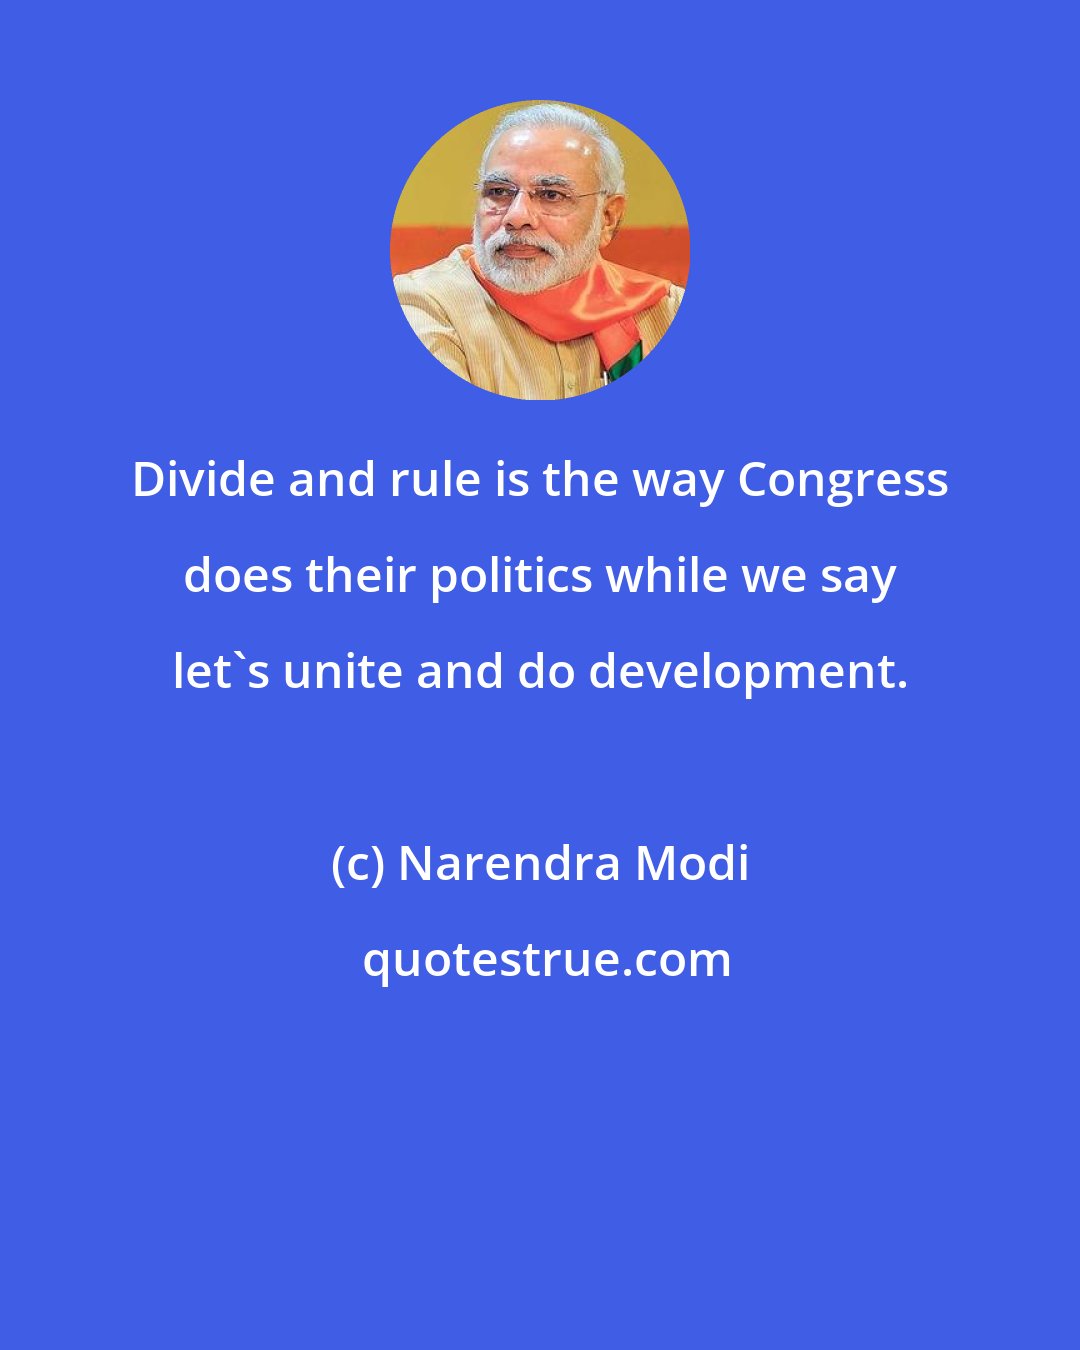 Narendra Modi: Divide and rule is the way Congress does their politics while we say let's unite and do development.